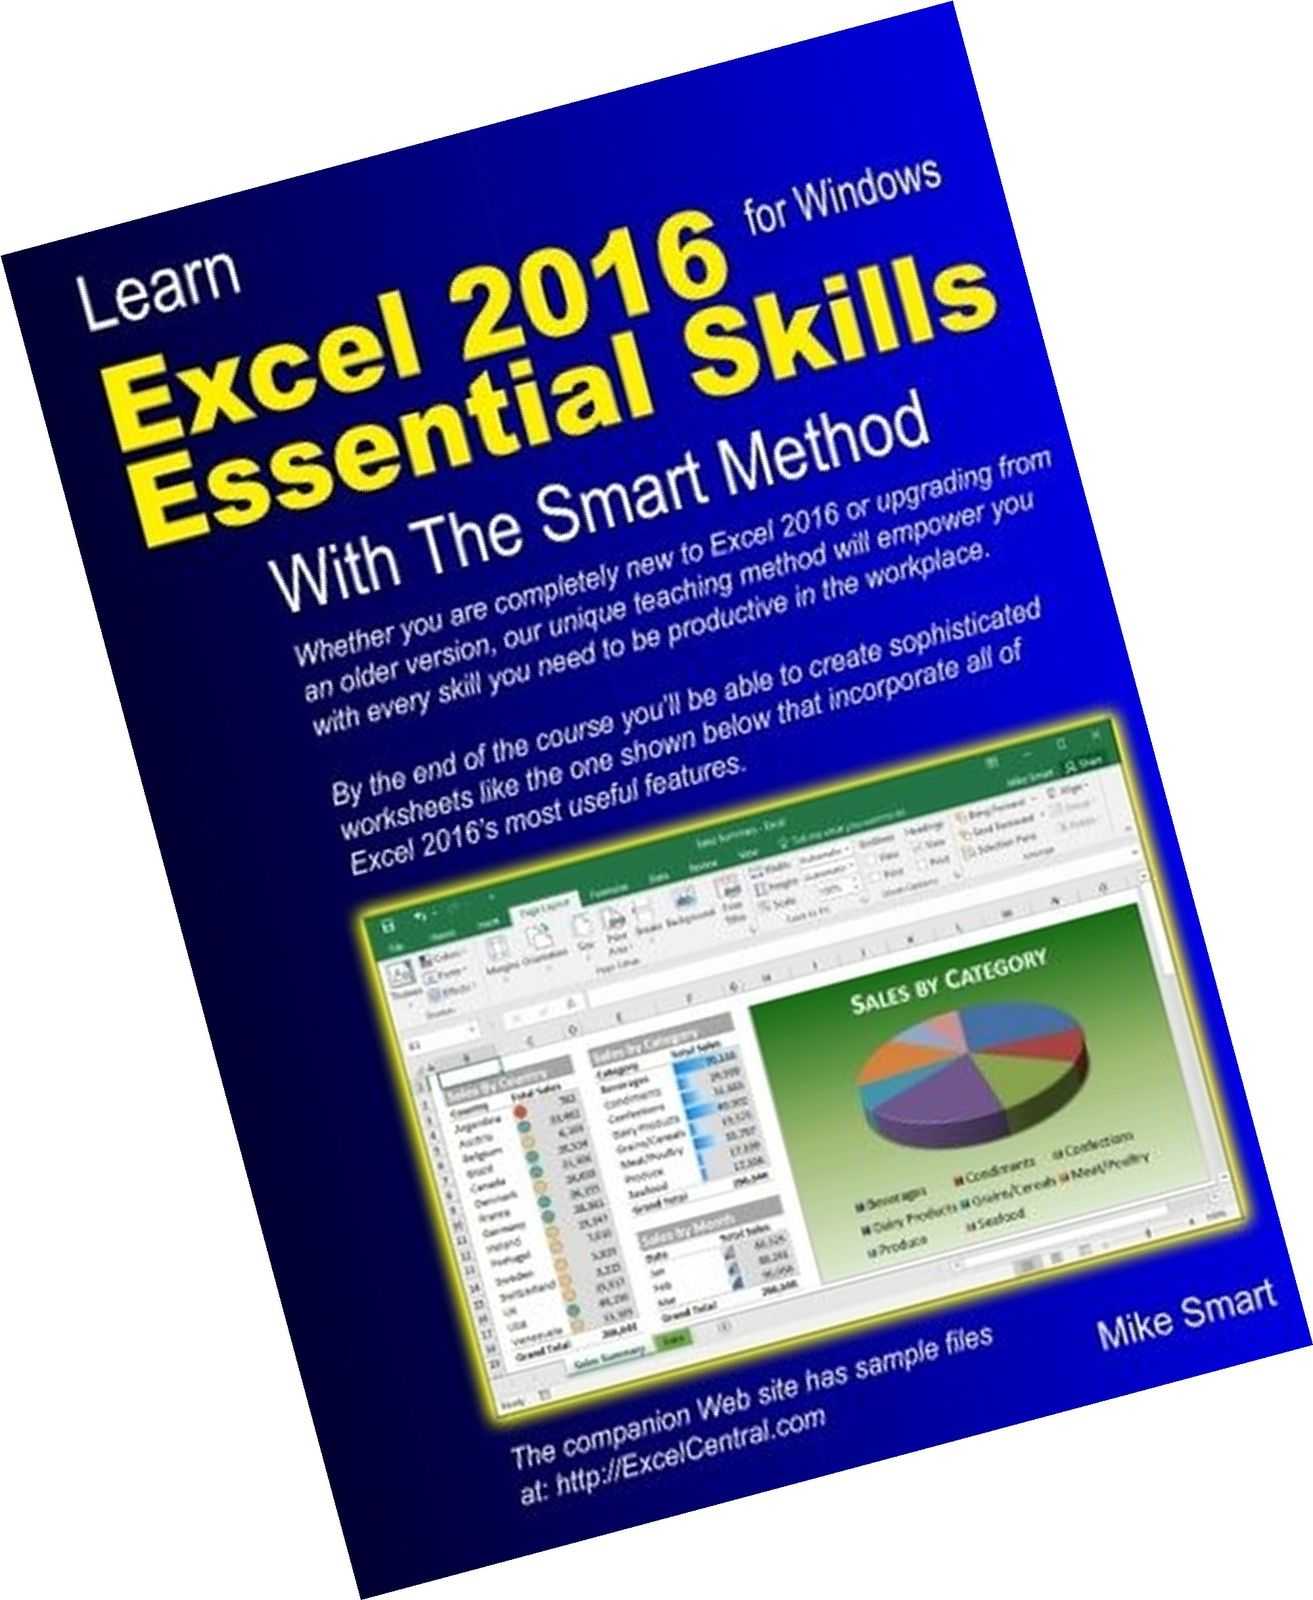 Culinary Essentials Worksheet Answers Along with Learn Excel 2016 Essential Skills with the Smart Method Courseware